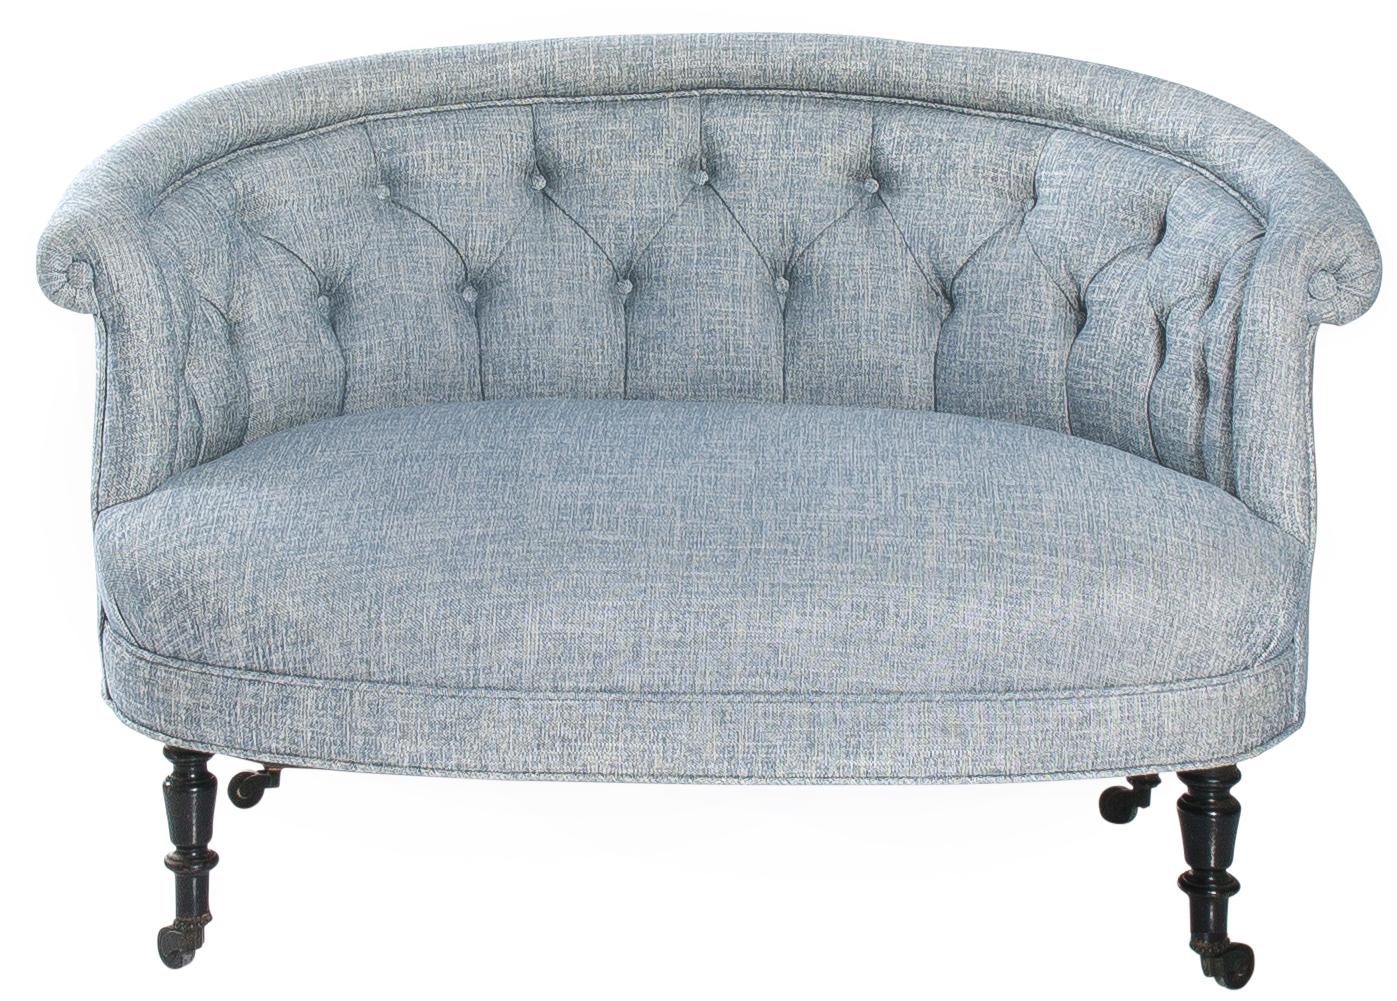 Petite French Napoleon III round scroll back sofa, circa 1880s. Turned black legs with original castors. Recently upholstered in Manuel Canovas 'Marius' in Ciel (light blue and white) linen.